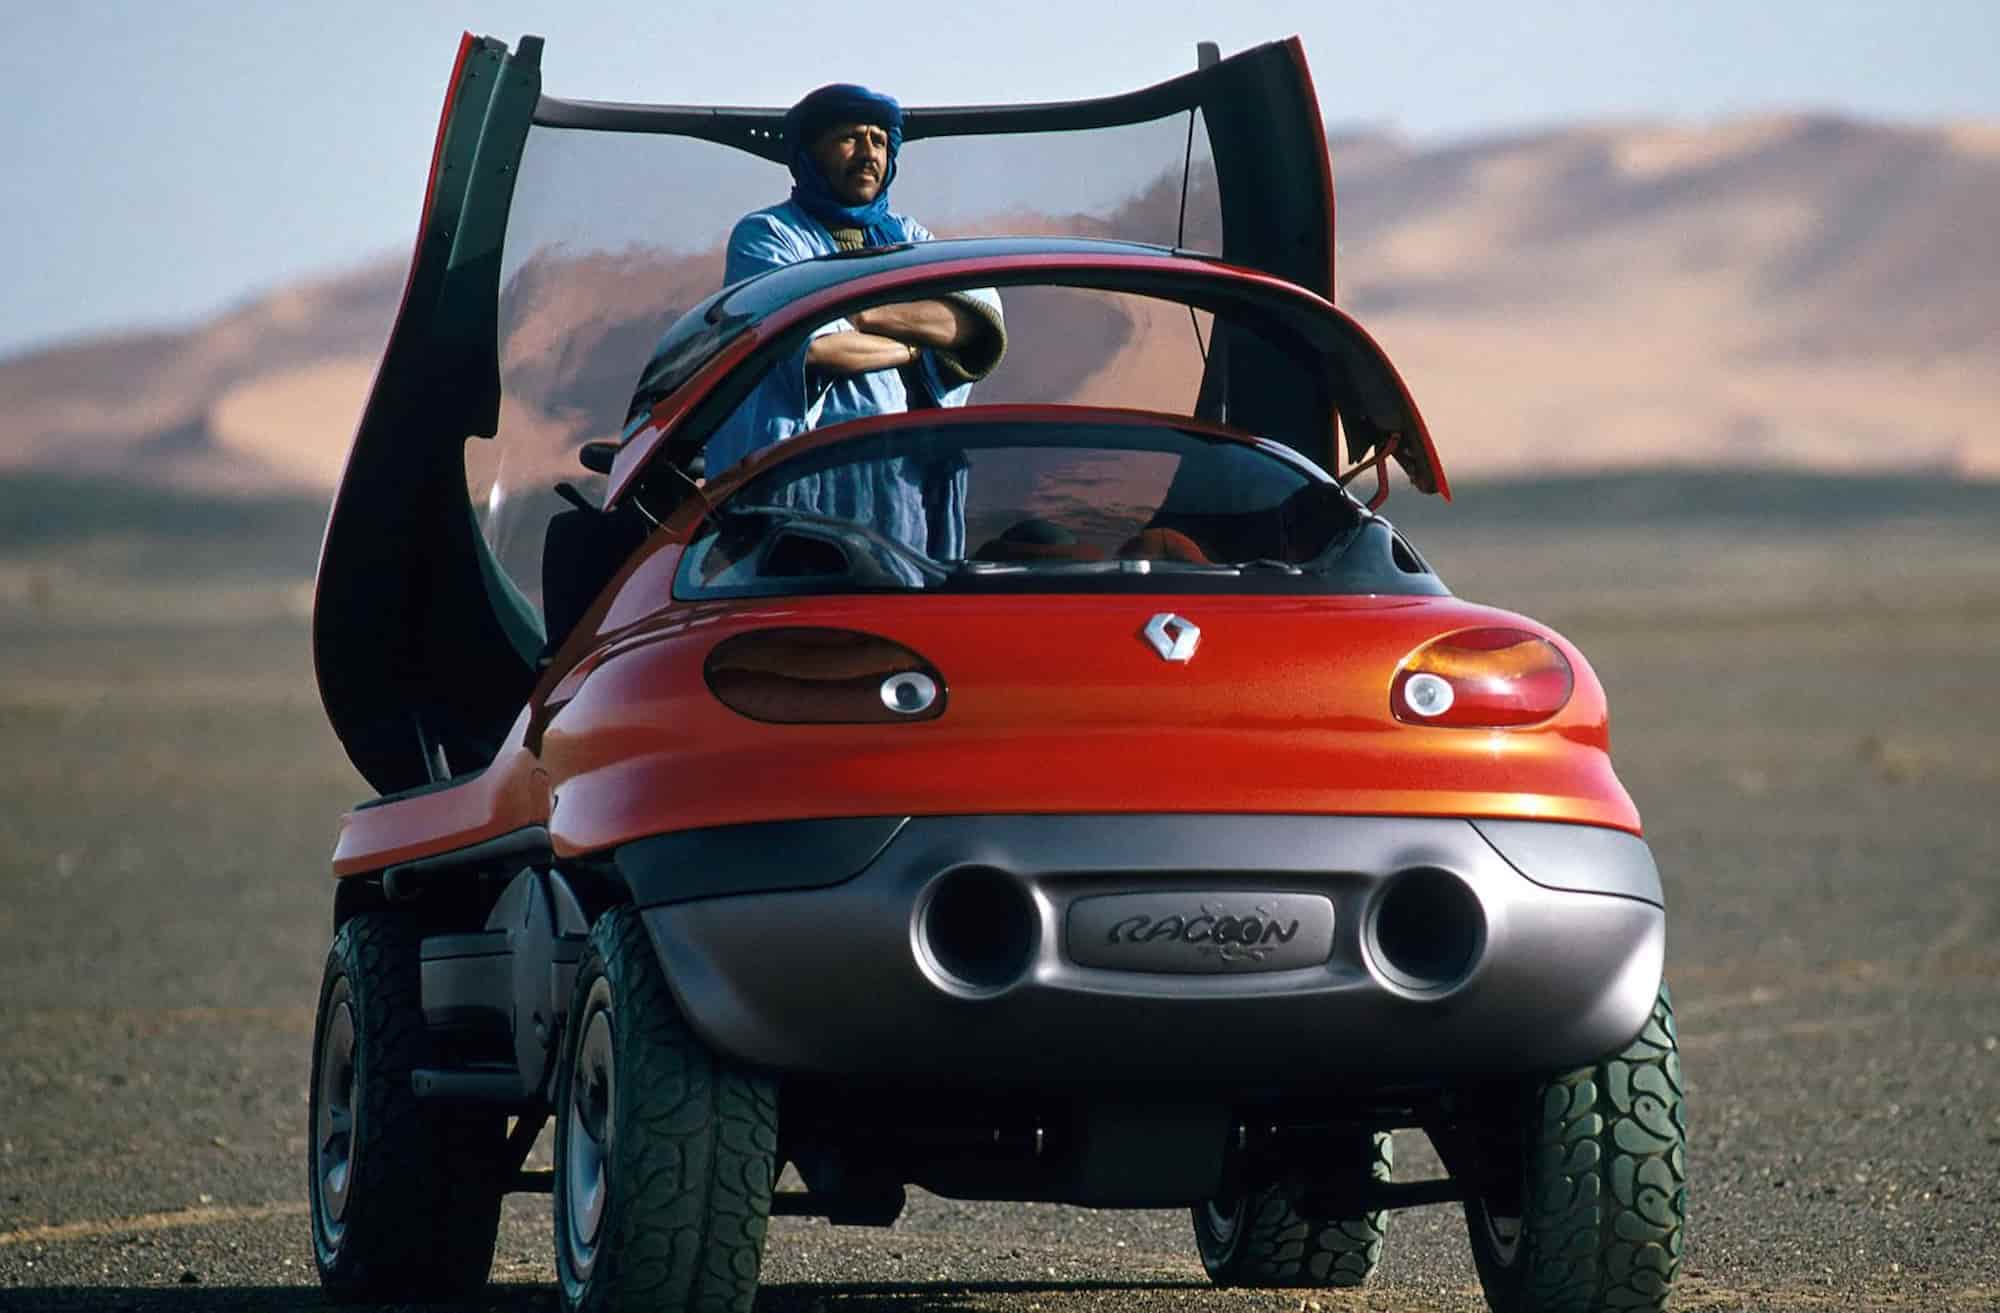 renault racoon an amphibious concept form the 1990s thats still mind blowing today 3